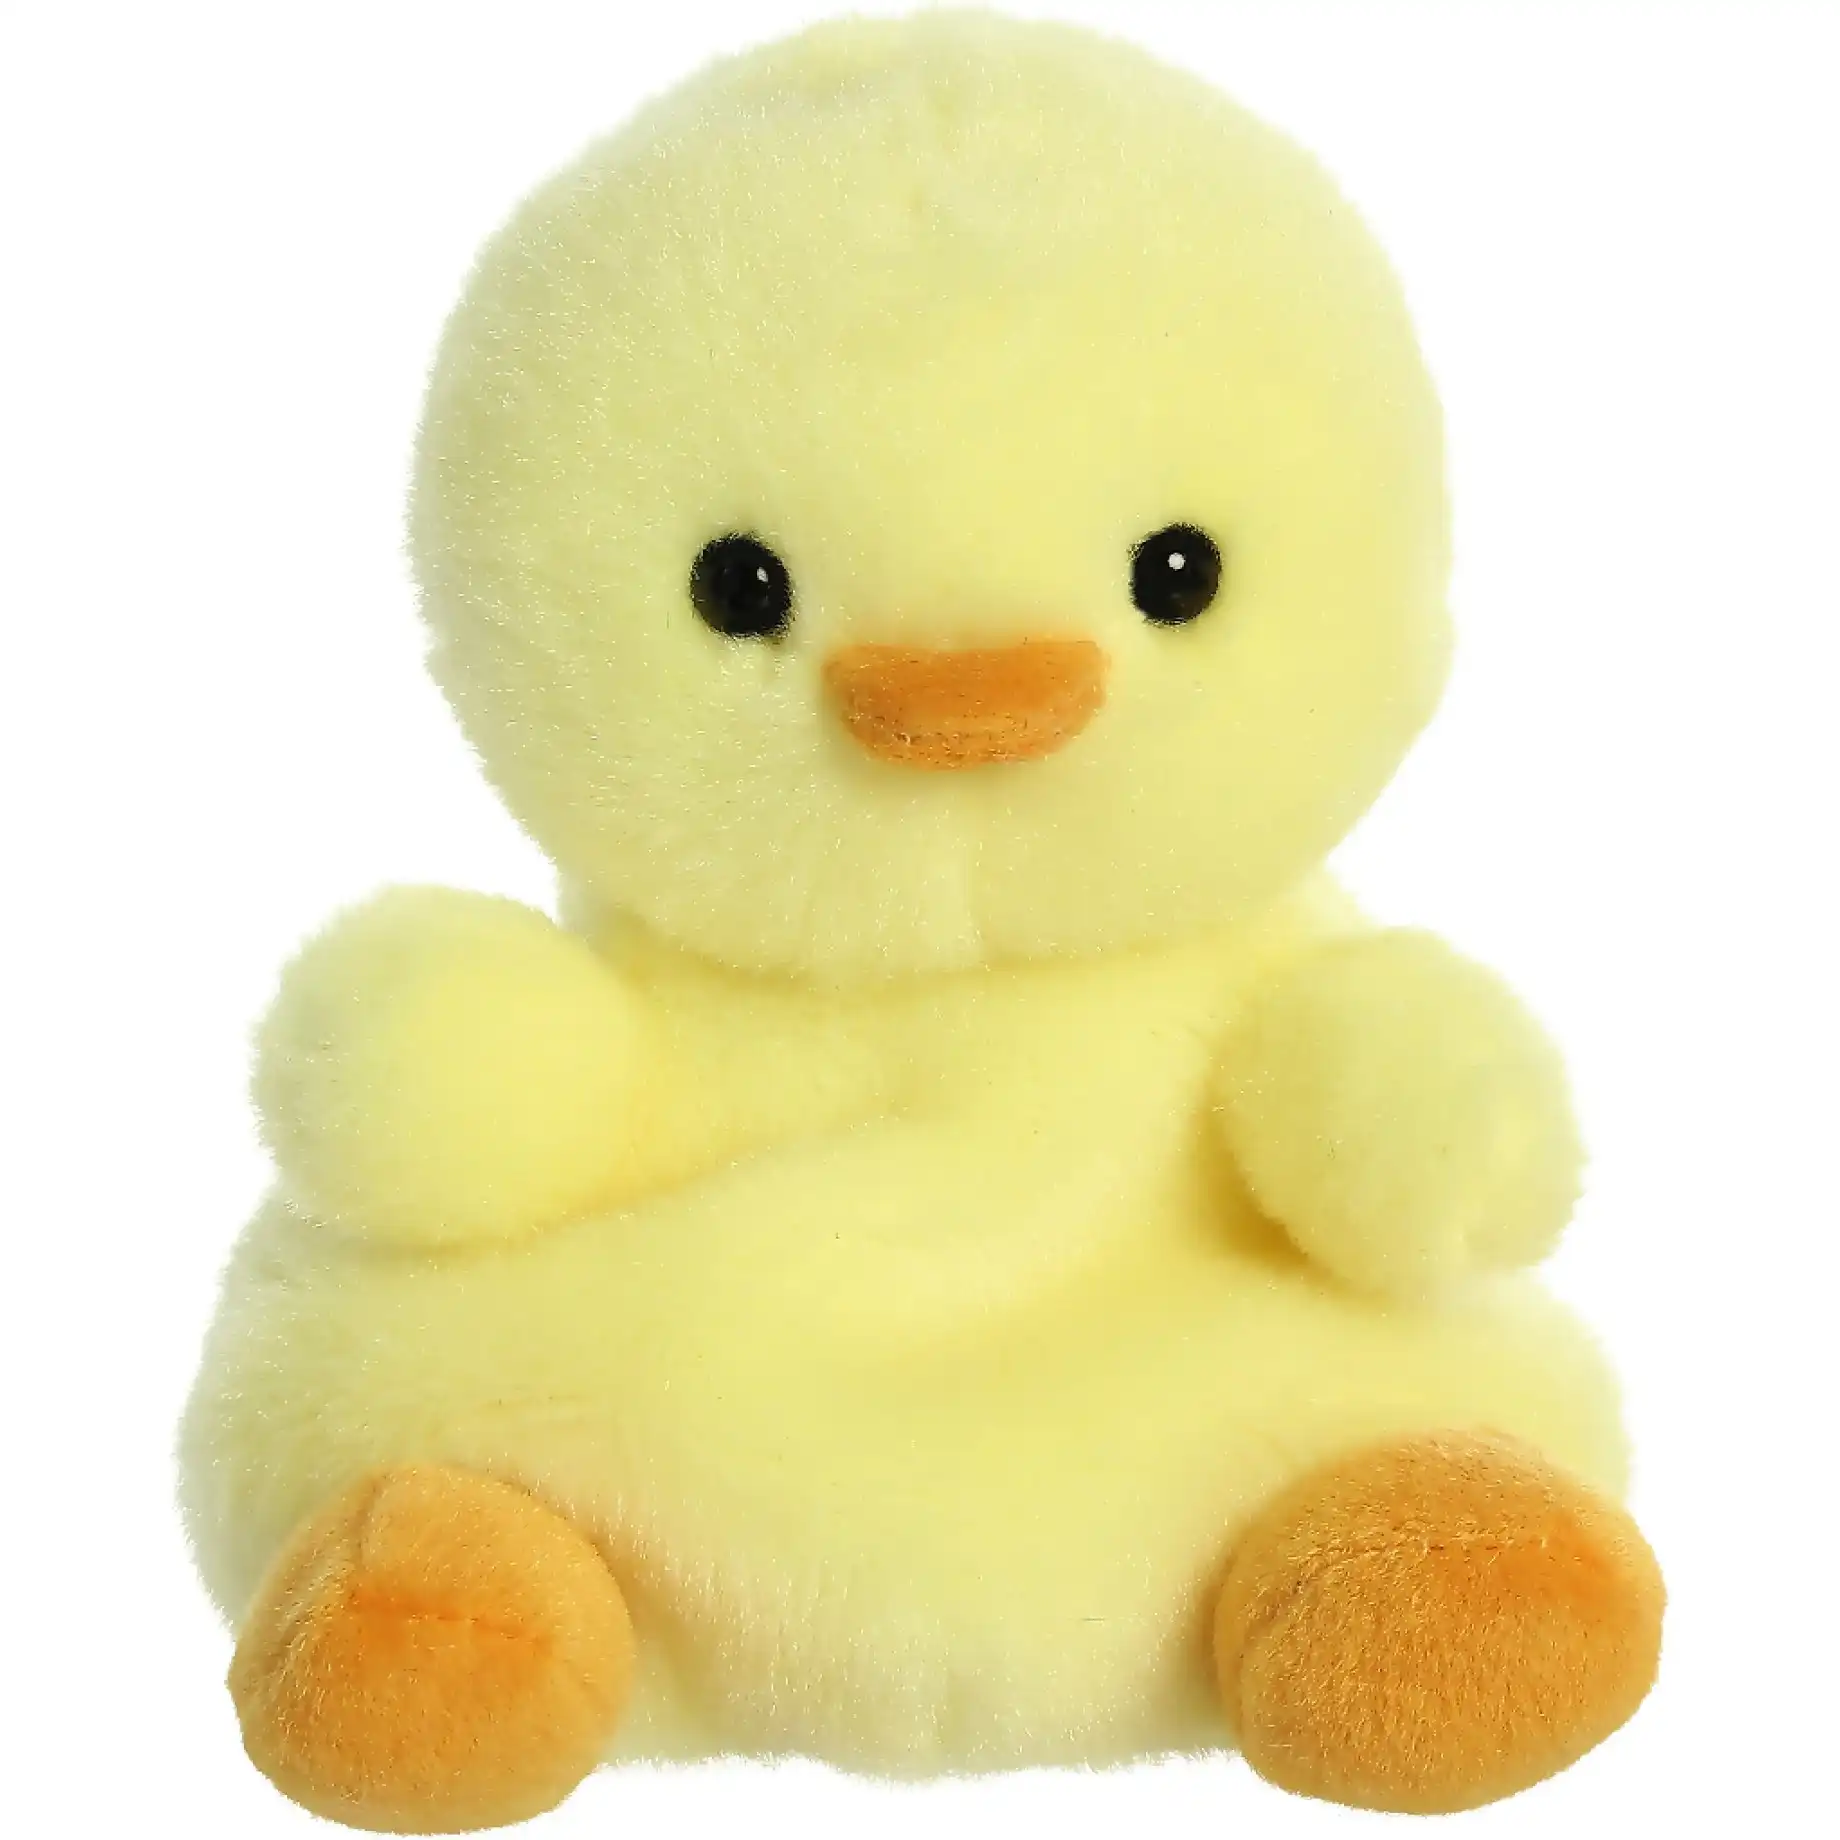 Cotton Candy - Palm Pals Betsy Chick 13cm